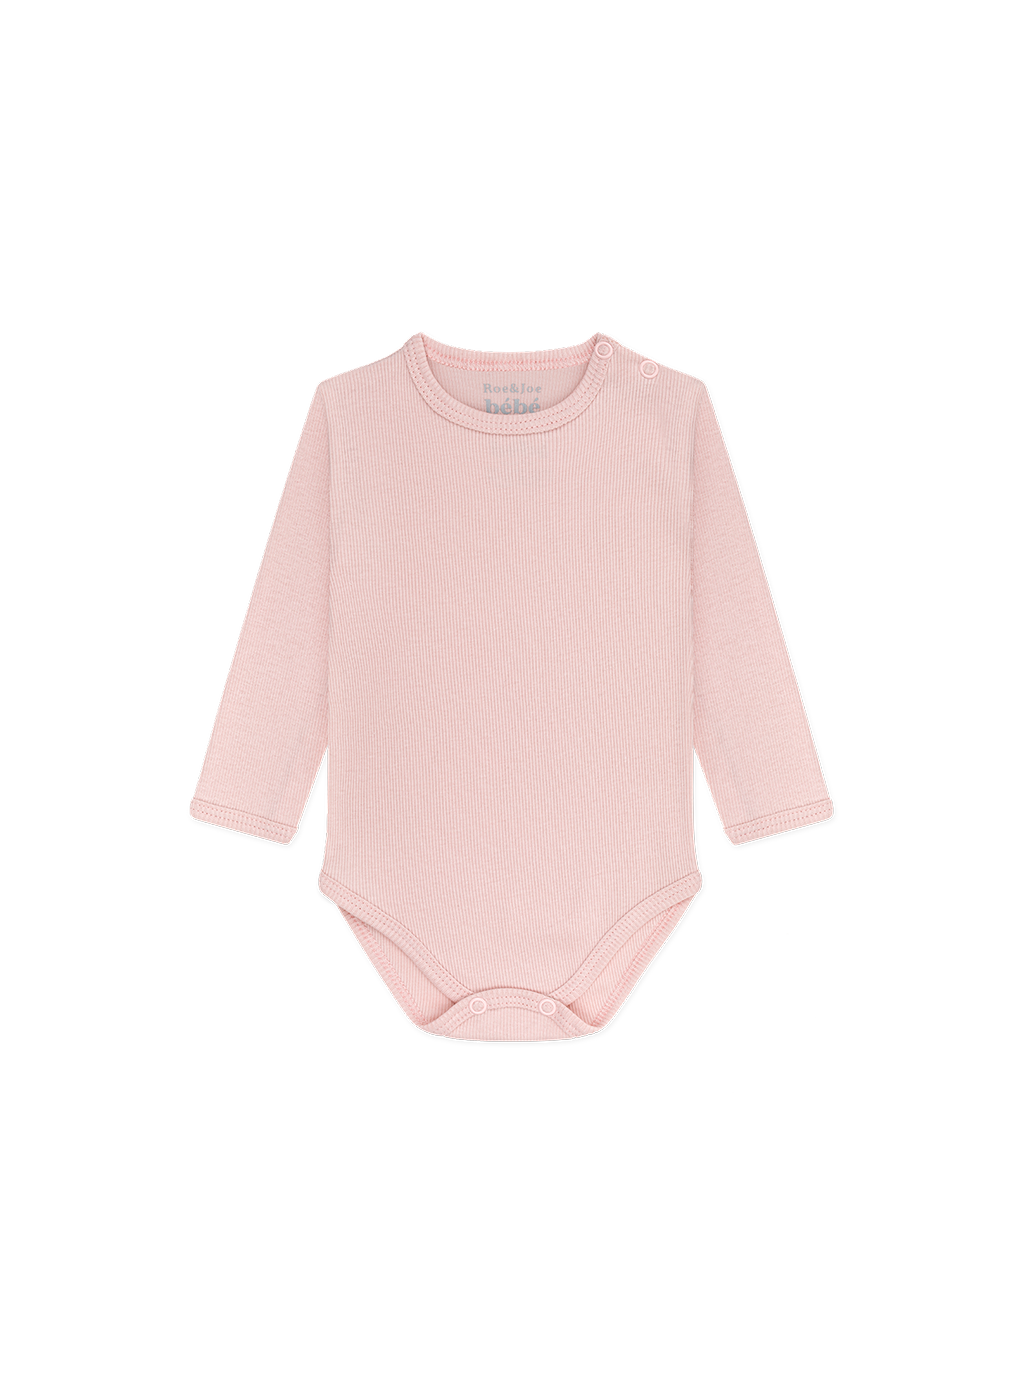 cotton body with long sleeves